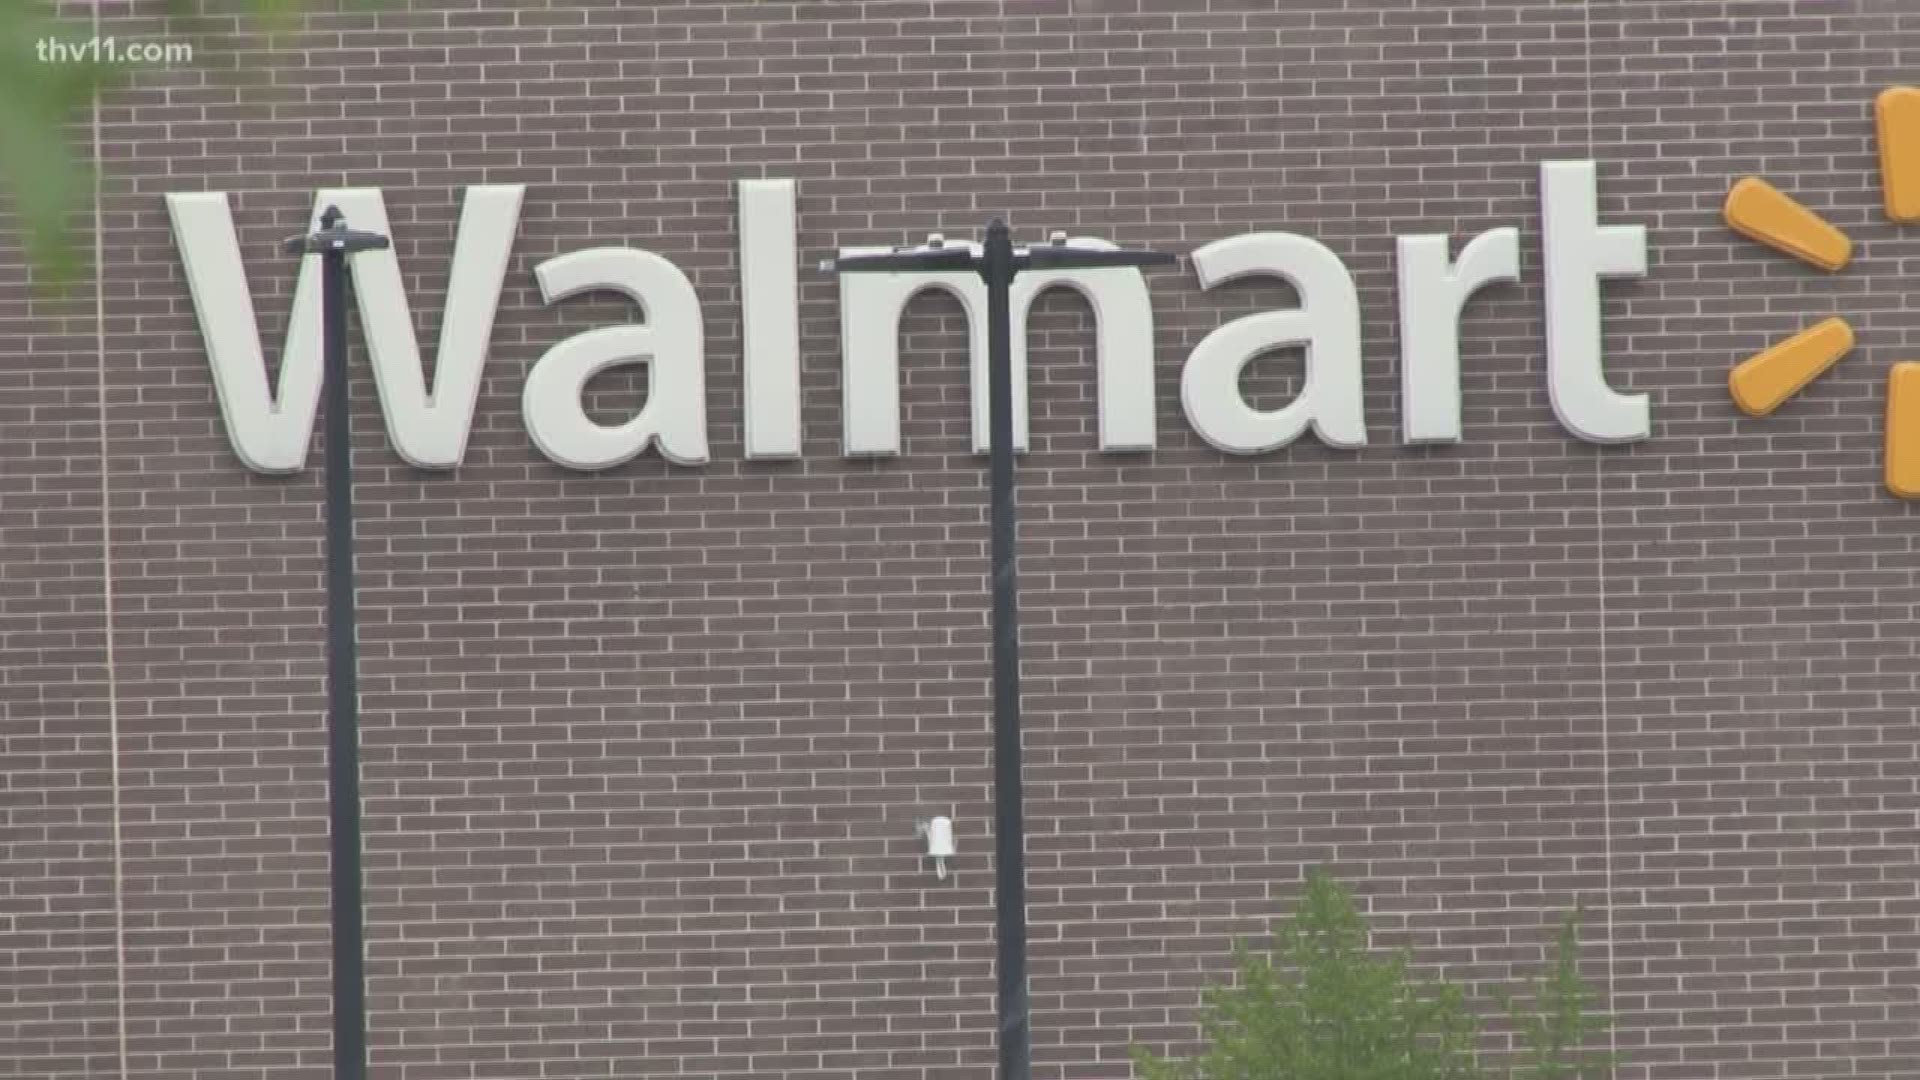 An unprecedented tax battle is brewing this week in Little Rock as Walmart, the world's largest retailer appeals its property tax assessment in Pulaski County.